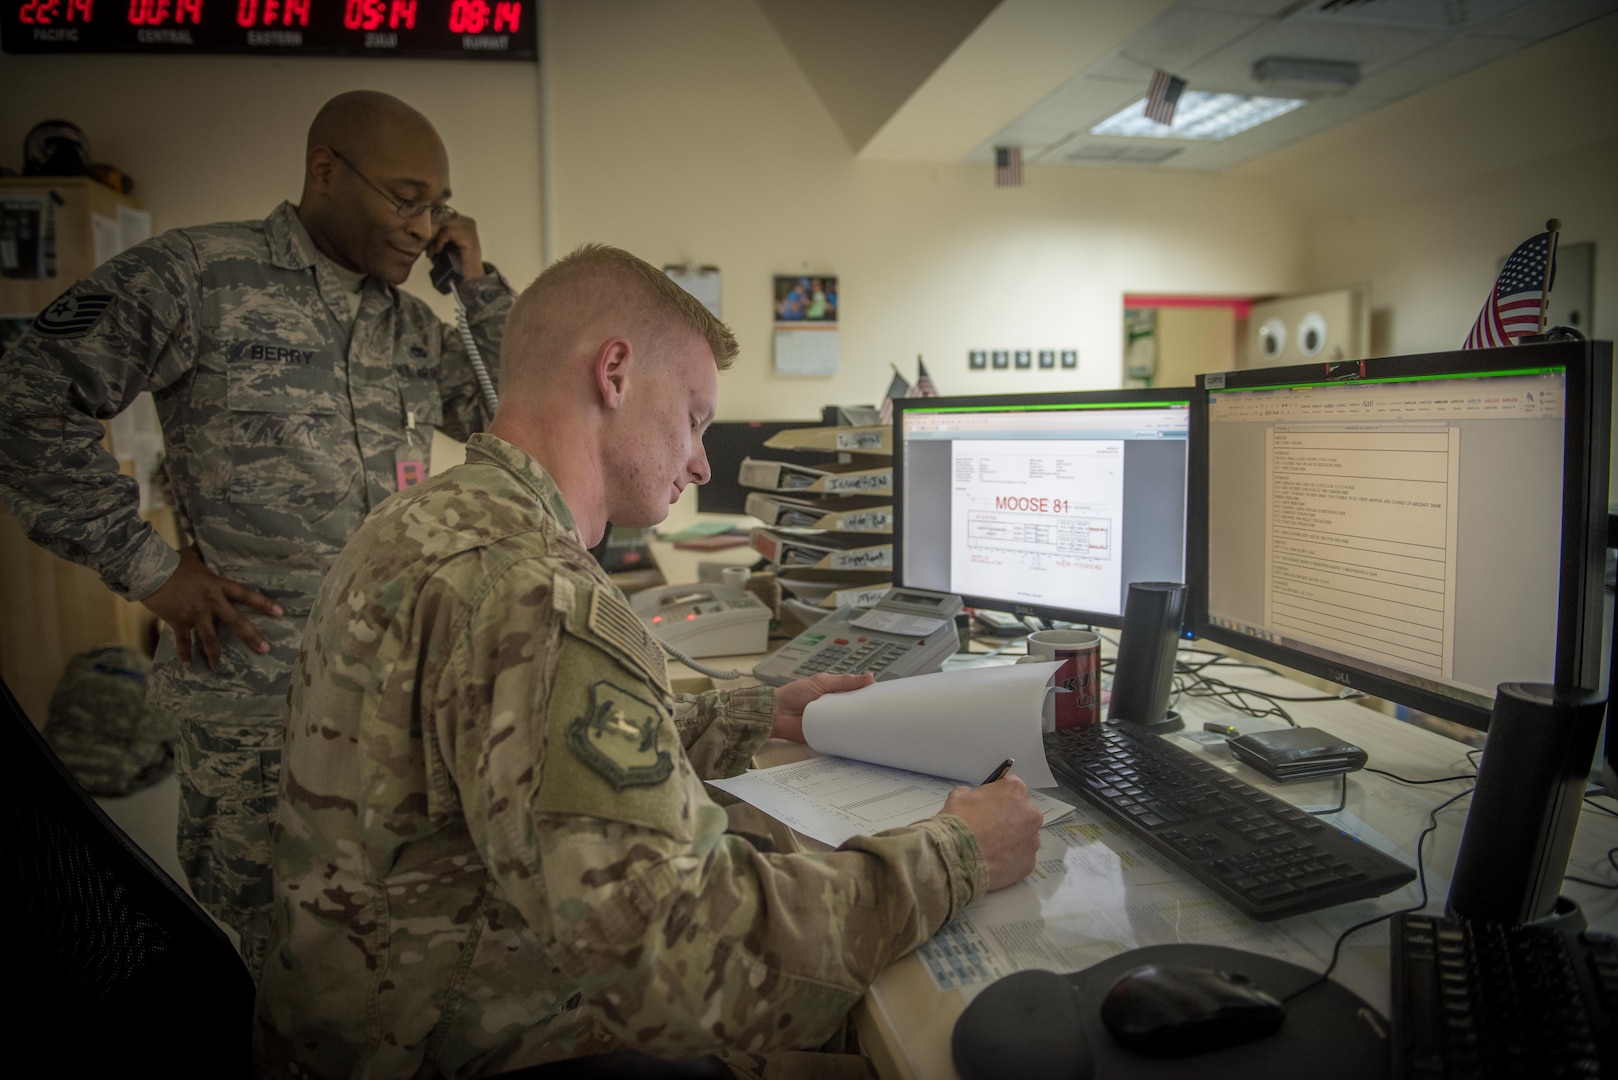 Senior Airman David Tiradeau, a ramp coordinator assigned to the 386th Expeditionary Logistics Readiness Squadron, relays information to the air terminal operations center, at an undisclosed location in Southwest Asia, August 15, 2017.